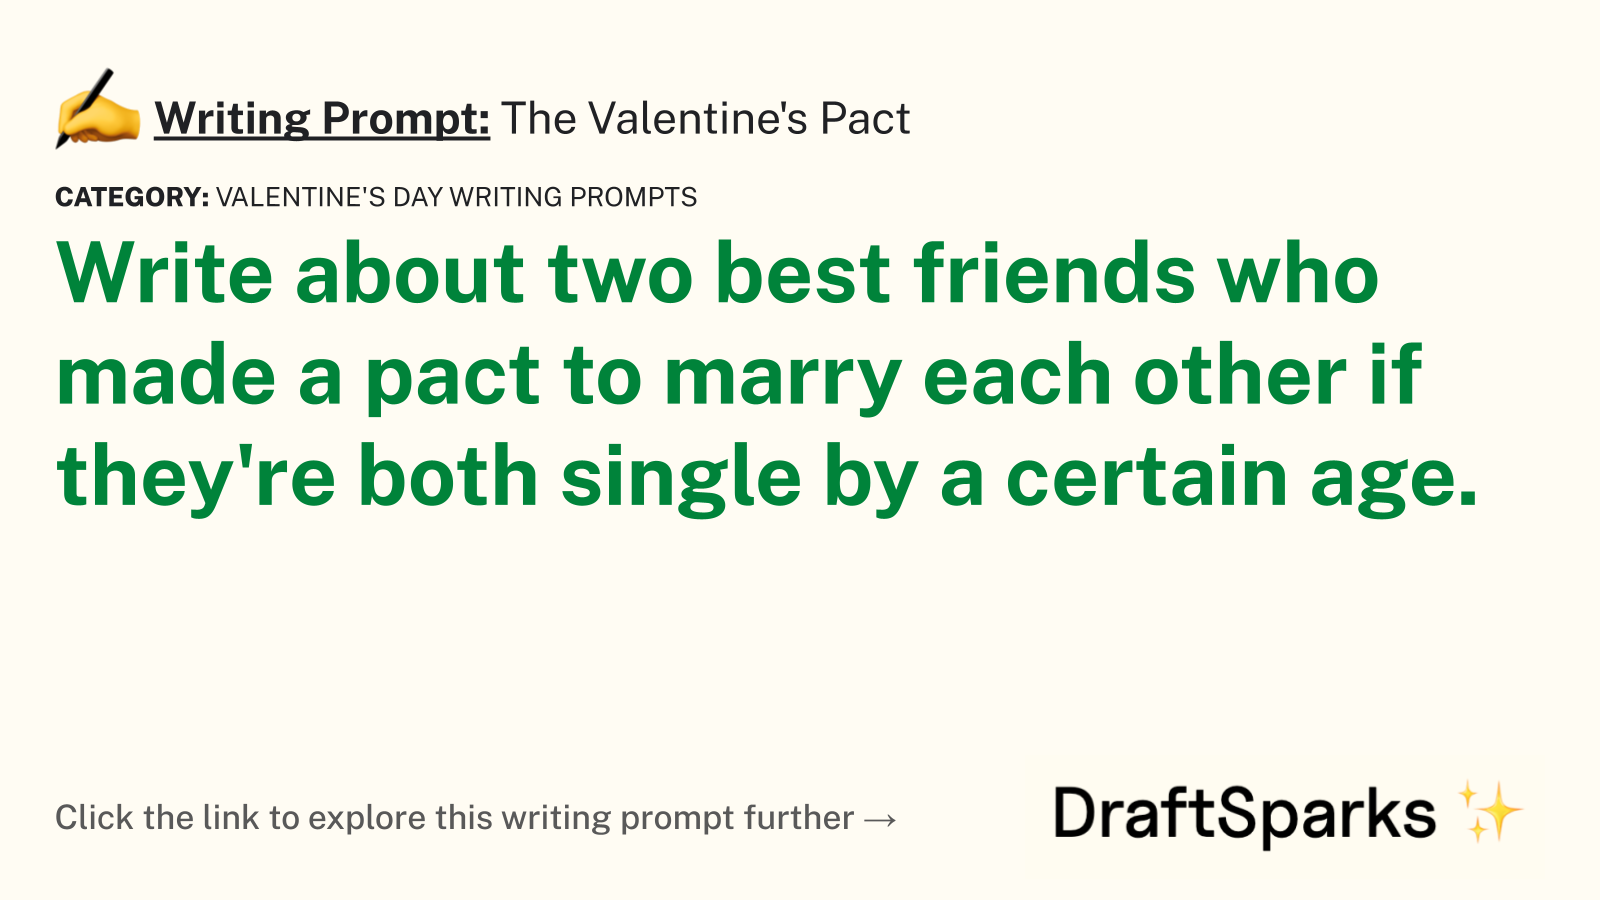 The Valentine’s Pact